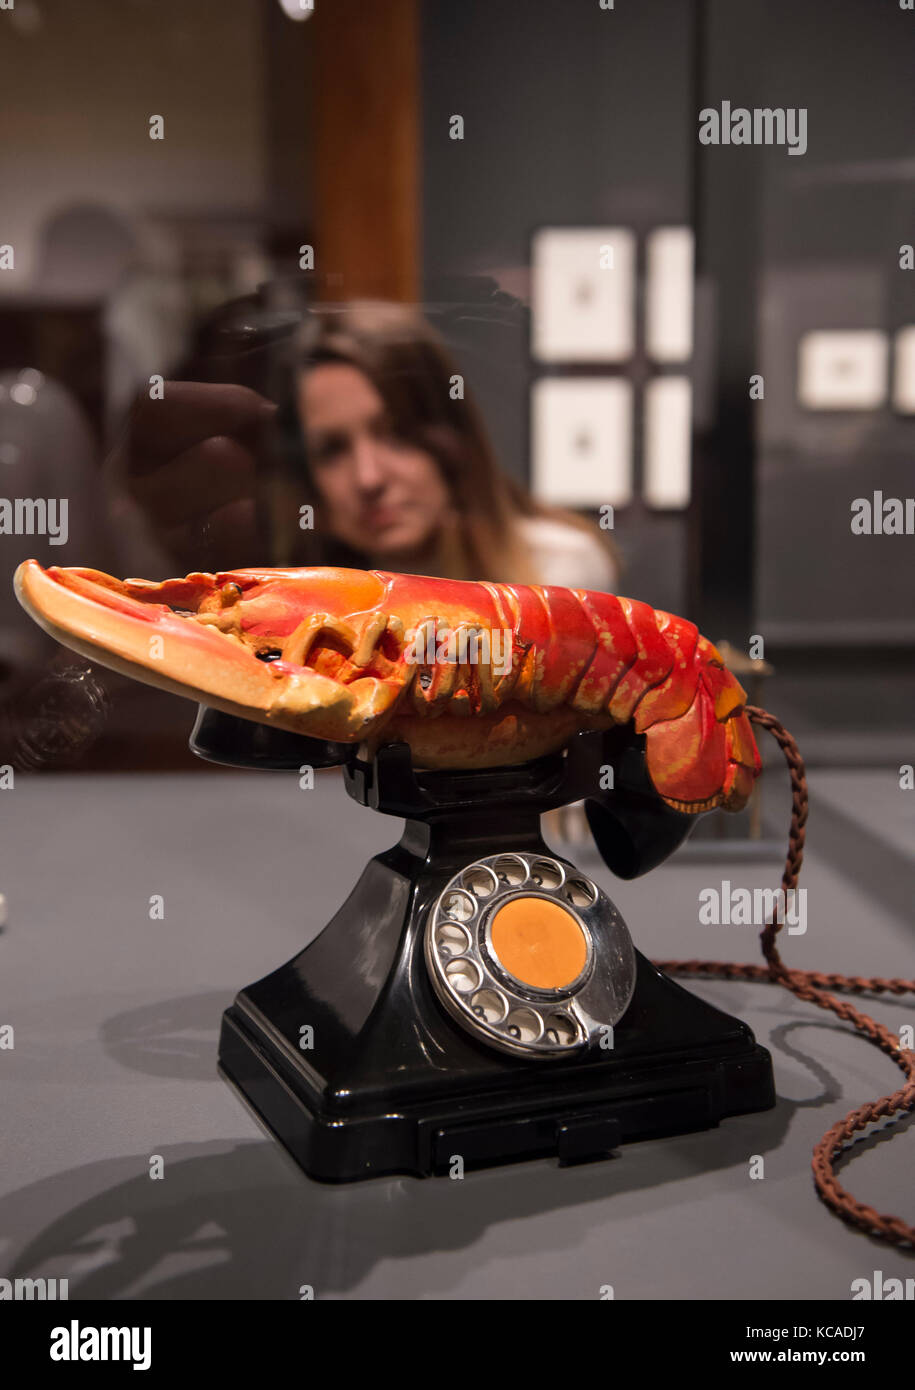 Royal Academy of Arts, London, UK. 3 October 2017. Two iconic works of the 20th century: Marcel Duchamp's Fountain, 1917/1964 and Salvador Dalí's Lobster Telephone, 1938 at the Royal Academy of Arts in an exhibition exploring the aesthetic and personal links between the two artists. The Dalí/Duchamp exhibition runs from 7 October 2017 - 3 January 2018. Dalí's Lobster Telephone, 1938 is on loan from West Dean College, West Sussex. Credit: Malcolm Park/Alamy Live News. Stock Photo